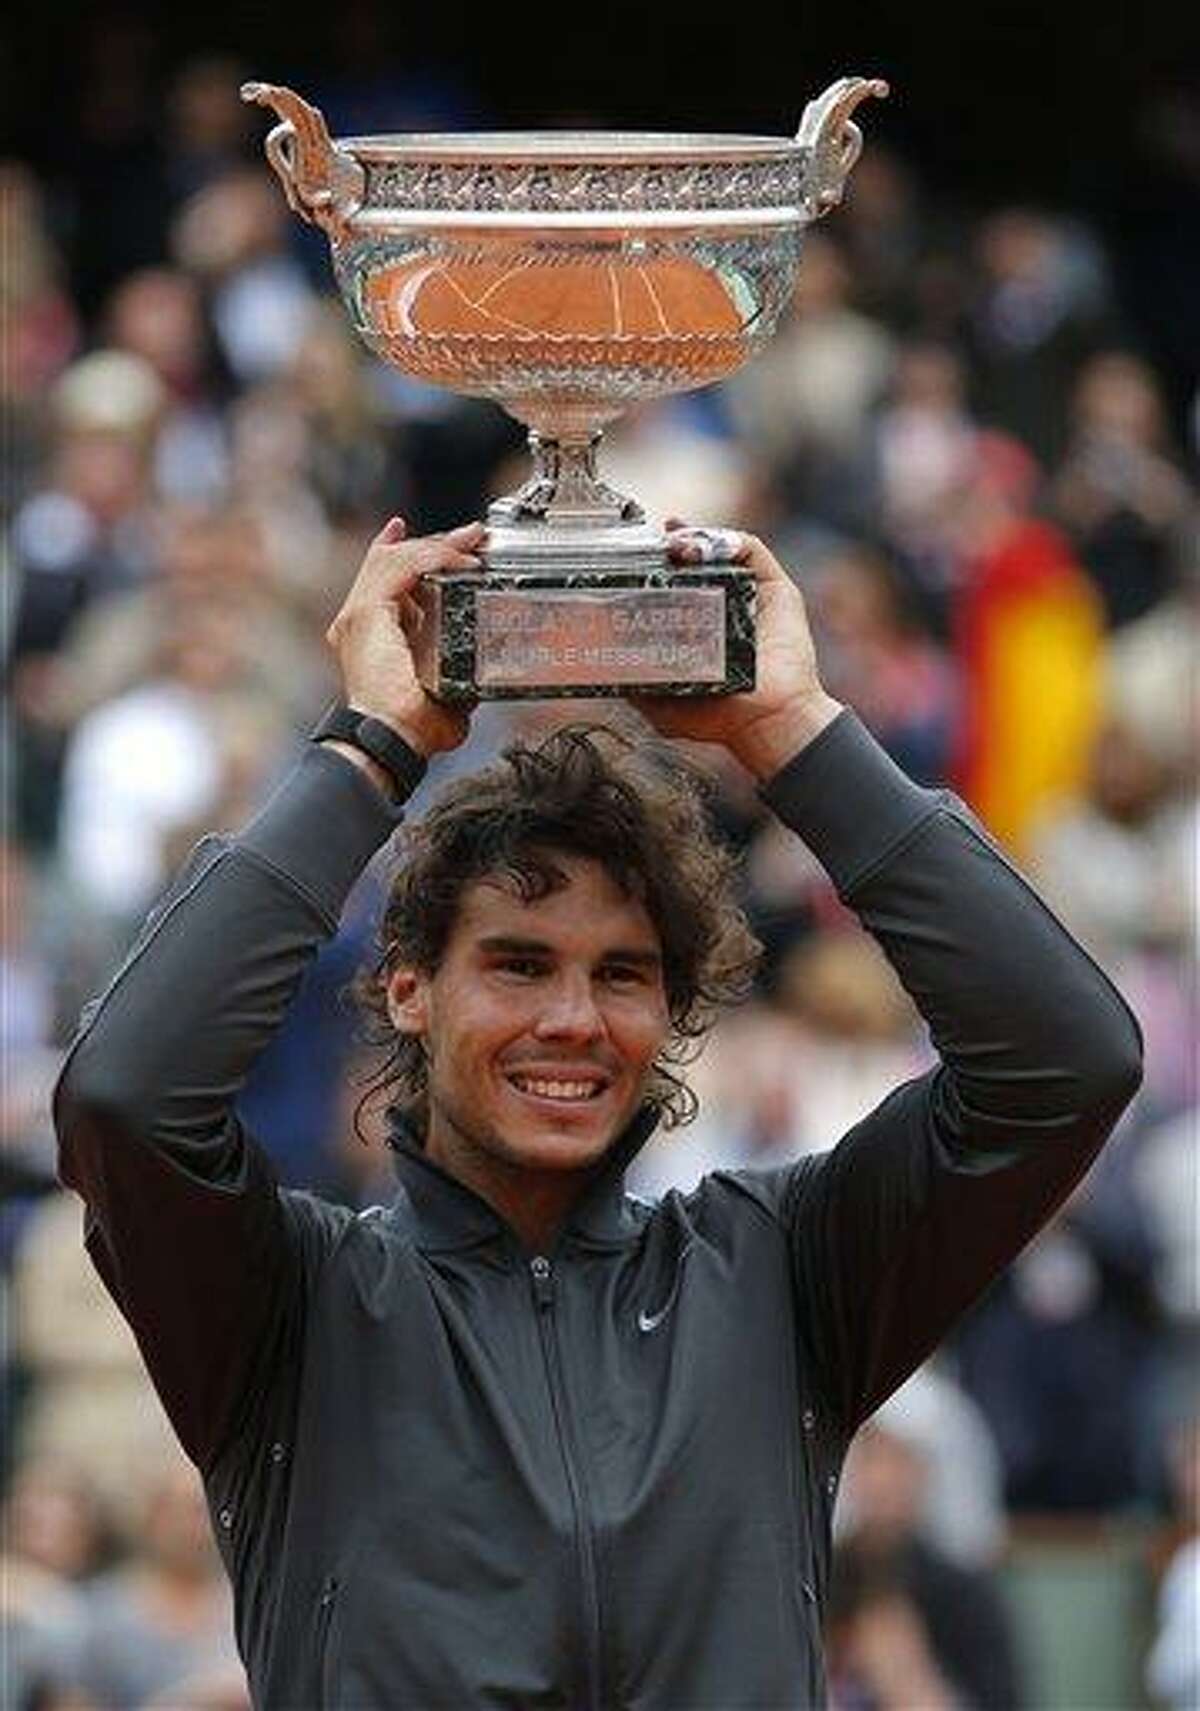 Spain's Rafael Nadal holds the cup after defeating Serbia's Novak Djokovic after their men's final match in the French Open tennis tournament at the Roland Garros stadium Monday in Paris. Nadal passes Bjorn Borg as the all-time record-holder for French Open titles. Associated Press